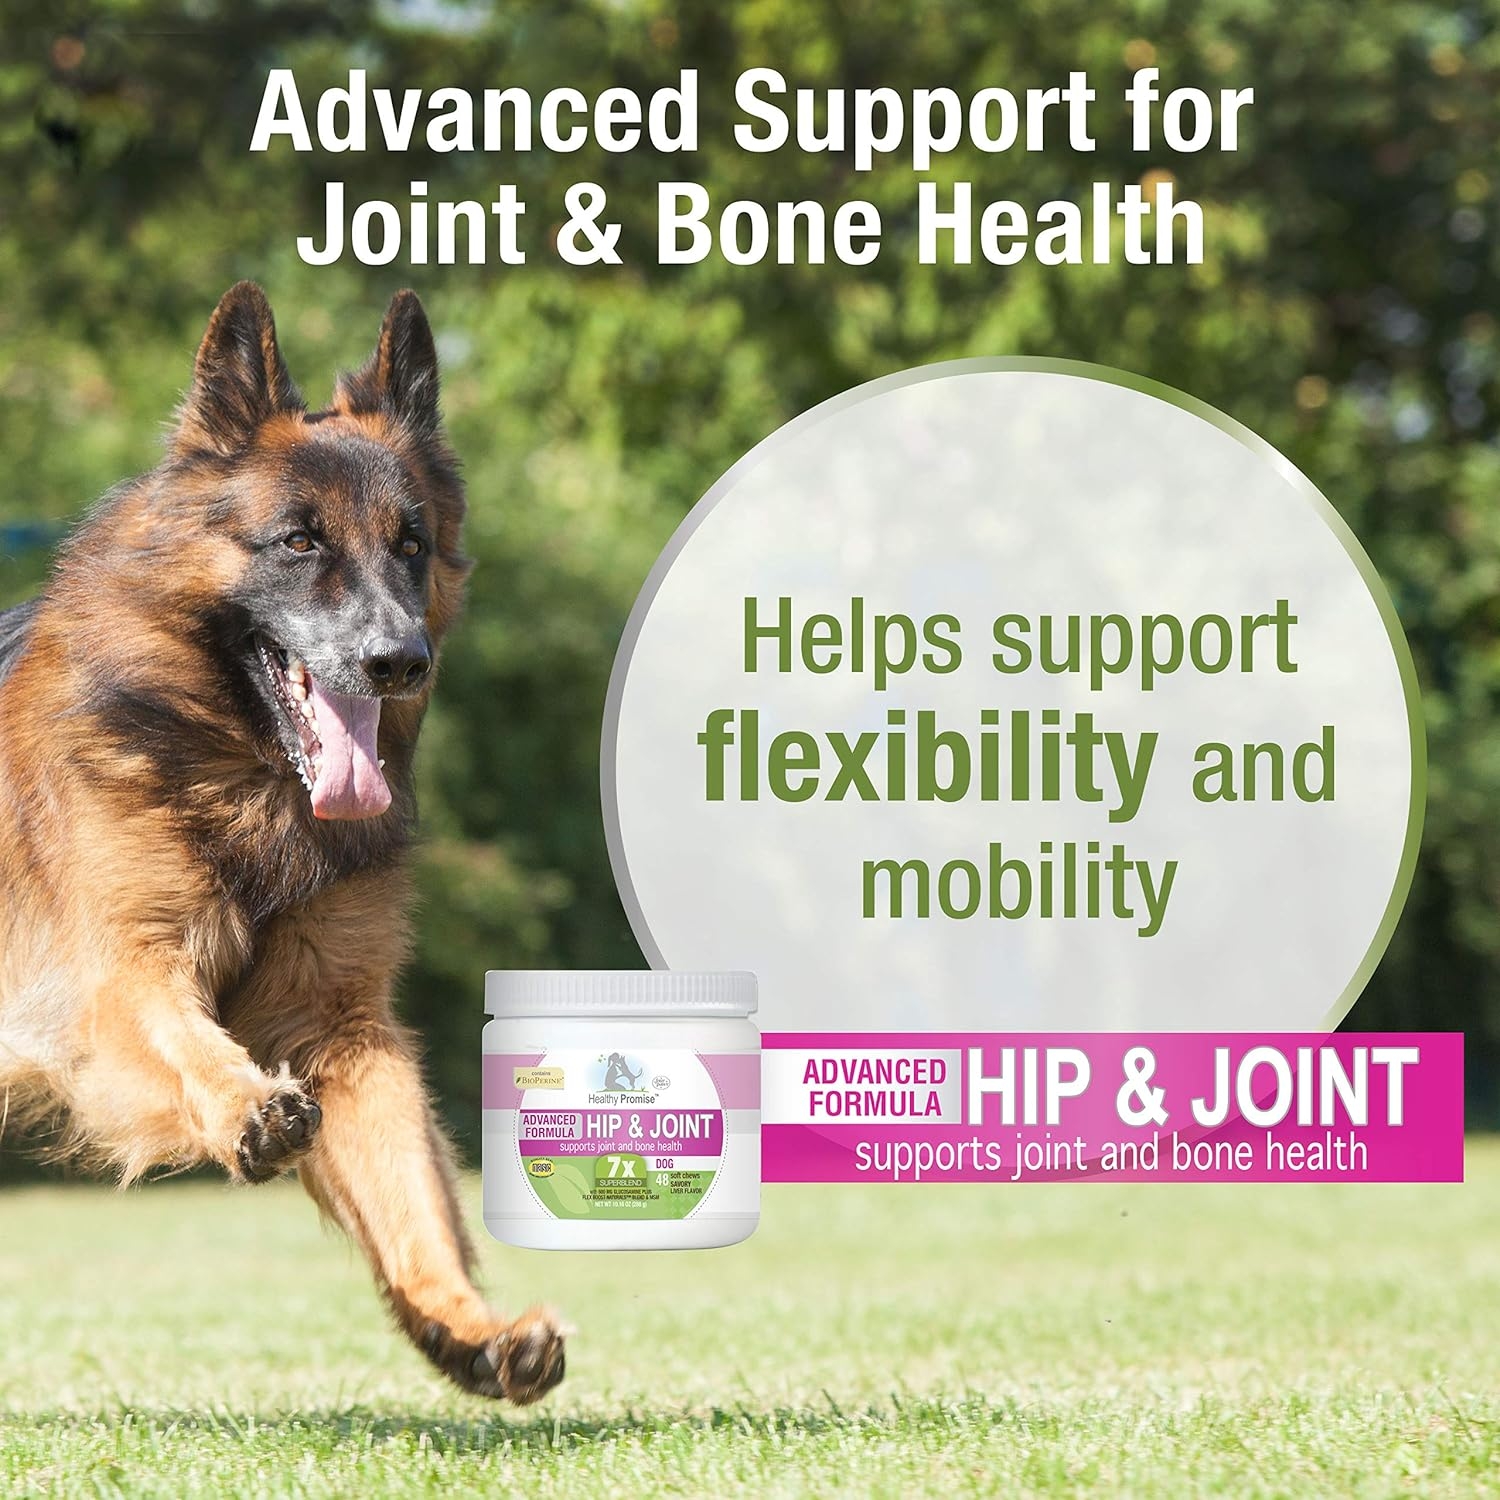 Four Paws Healthy Promise Dog Supplements, Tasty Superblend Dog Supplements & Remedies- Pre & Probiotic, Skin & Coat, Calming, Immunity, Multivitamin, Hip & Joint